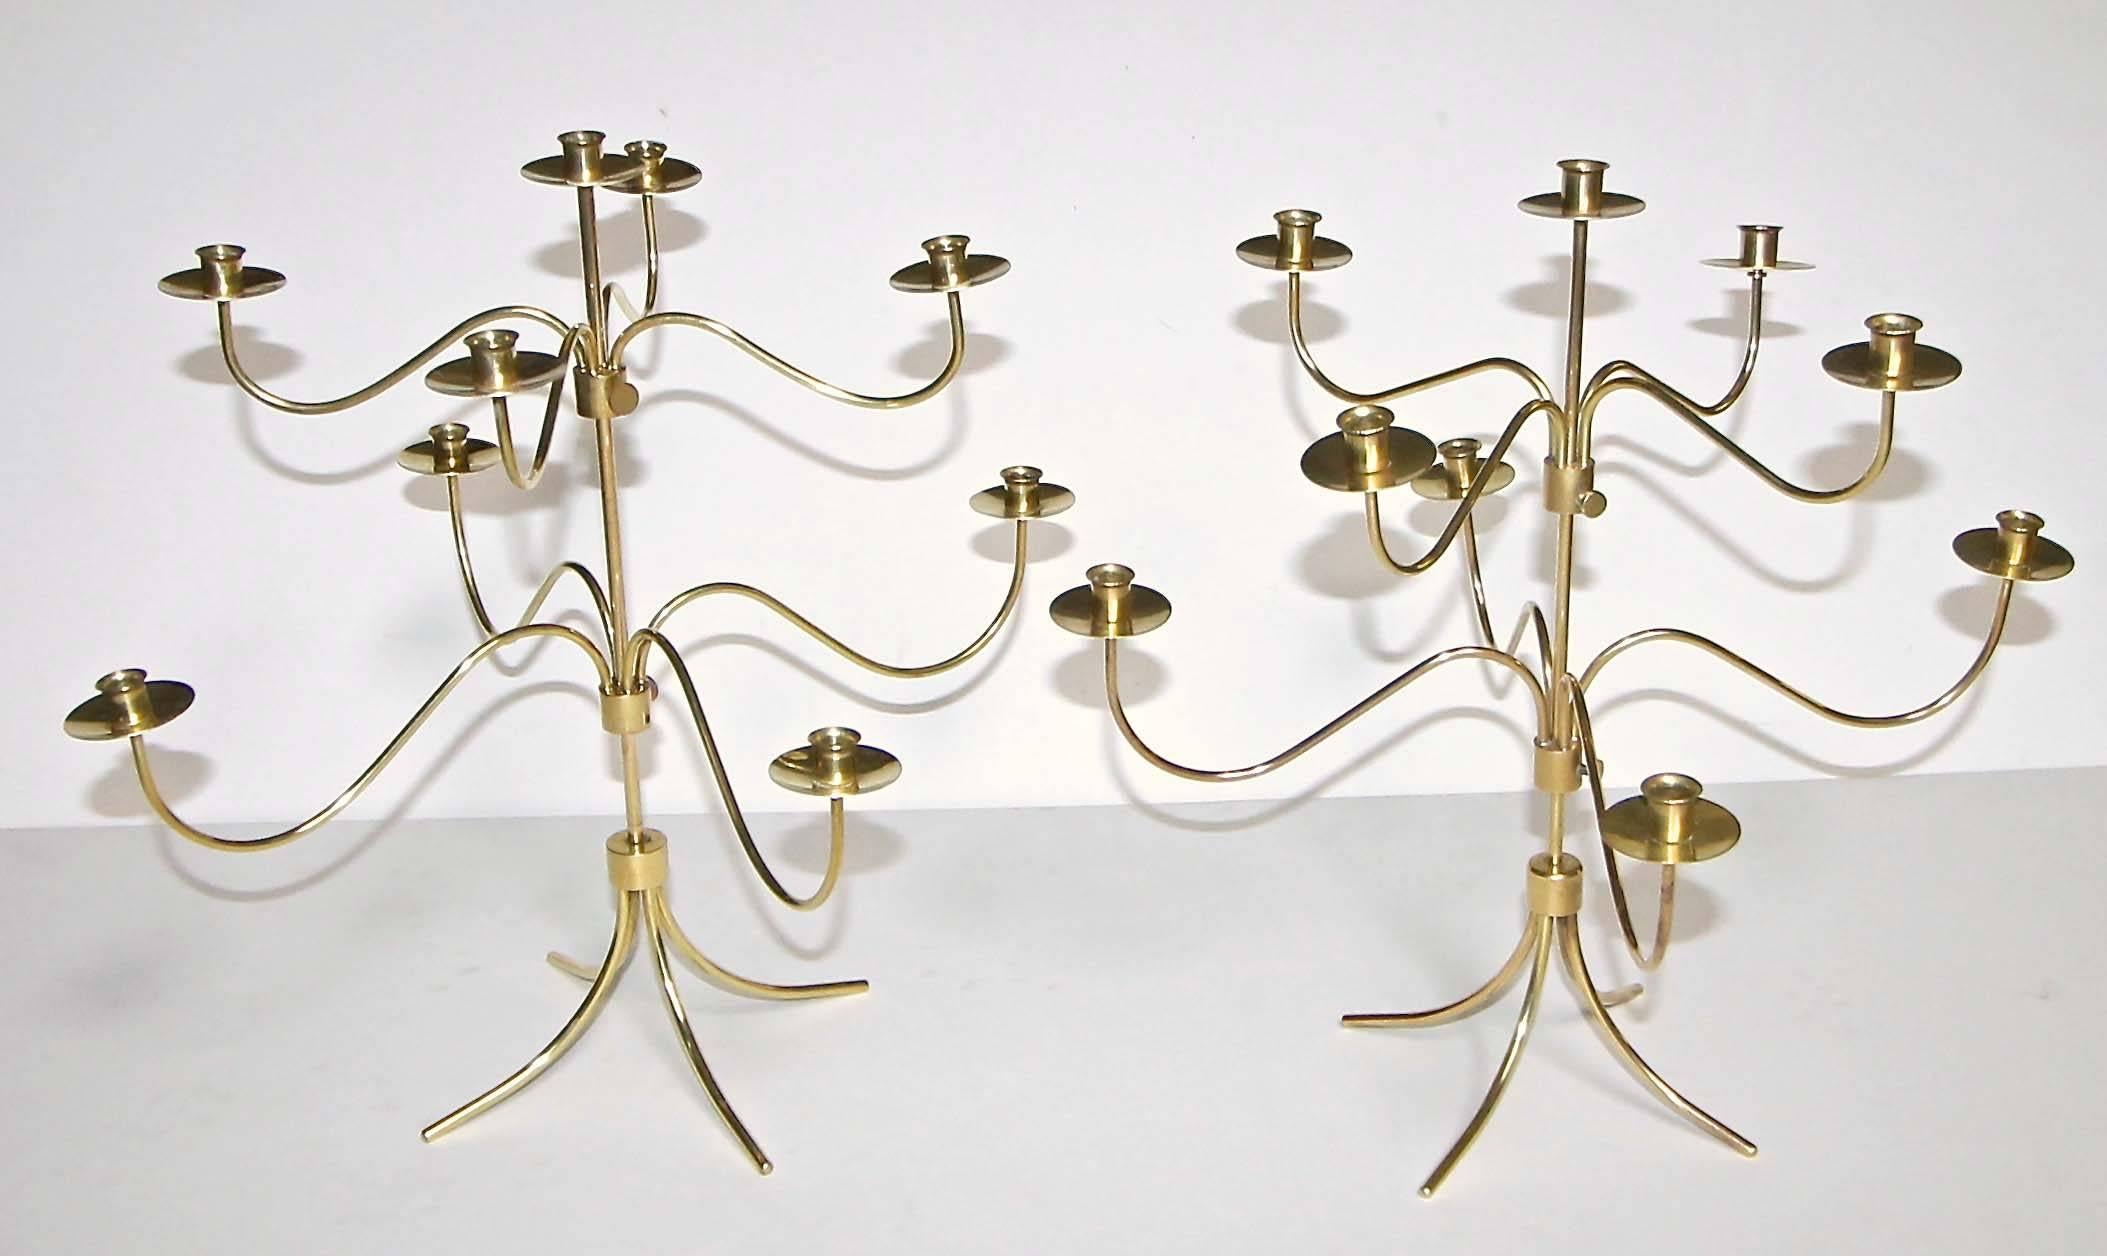 A pair of delicately handcrafted Mid-Century nine-arm brass Swedish candelabra or candleholders designed by Josef Frank for Svenskt Tenn. A thumb screw adjusts the height of the two levels. One candelabra is stamped "Made In Sweden".